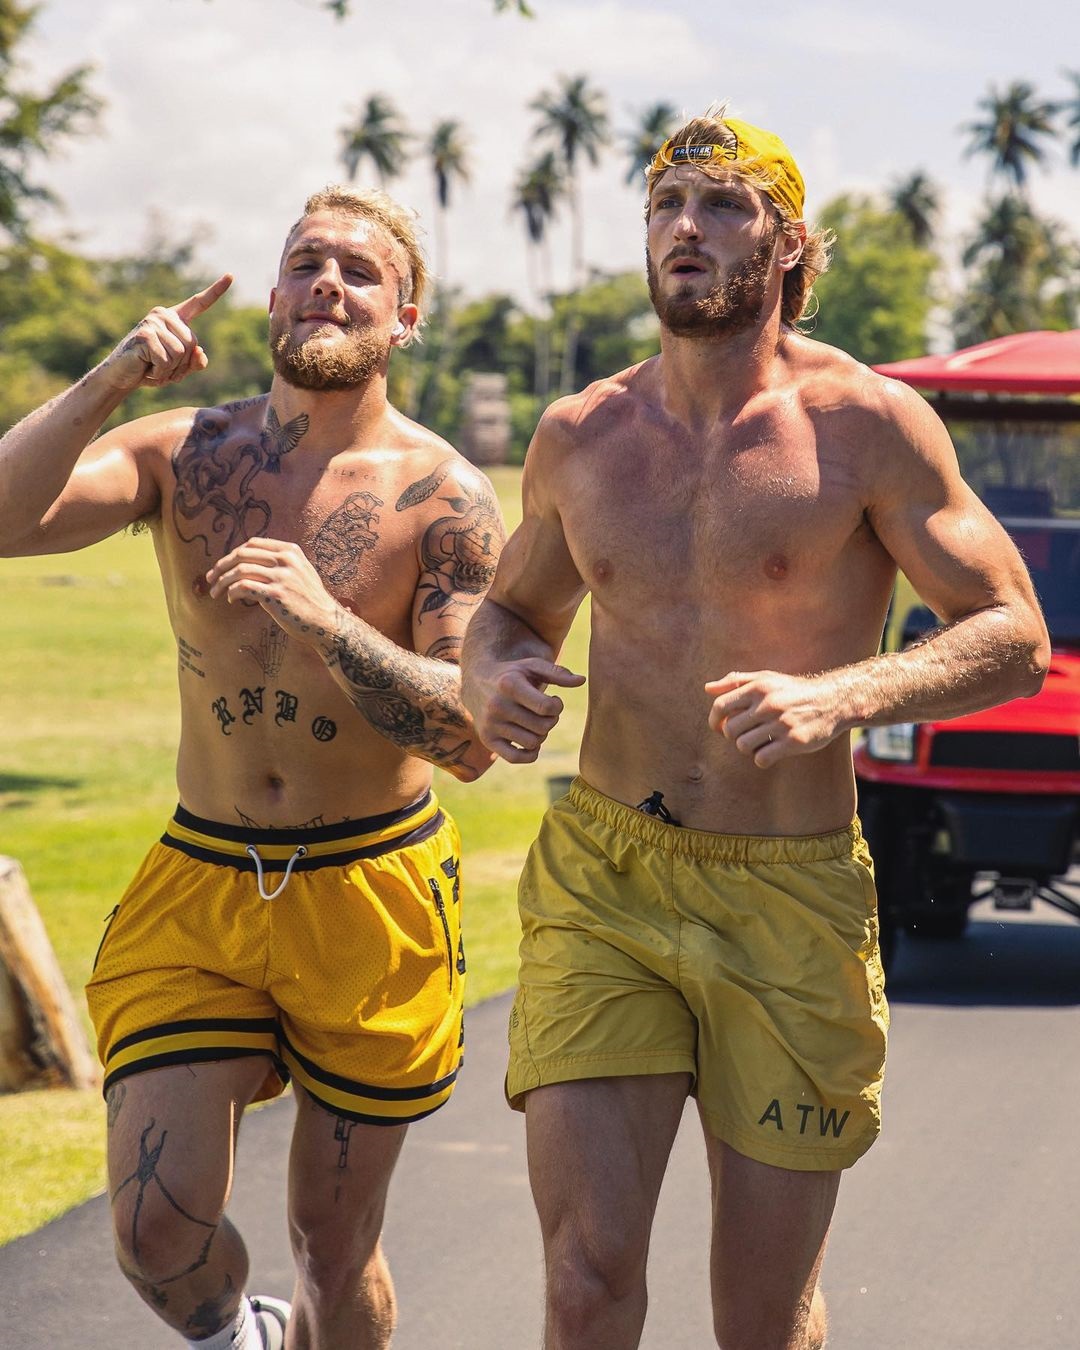 Jake Paul's sparring partner is Logan, a YouTuber and brother who will battle UFC's Nick Diaz and Nate Diaz in a two-fight series